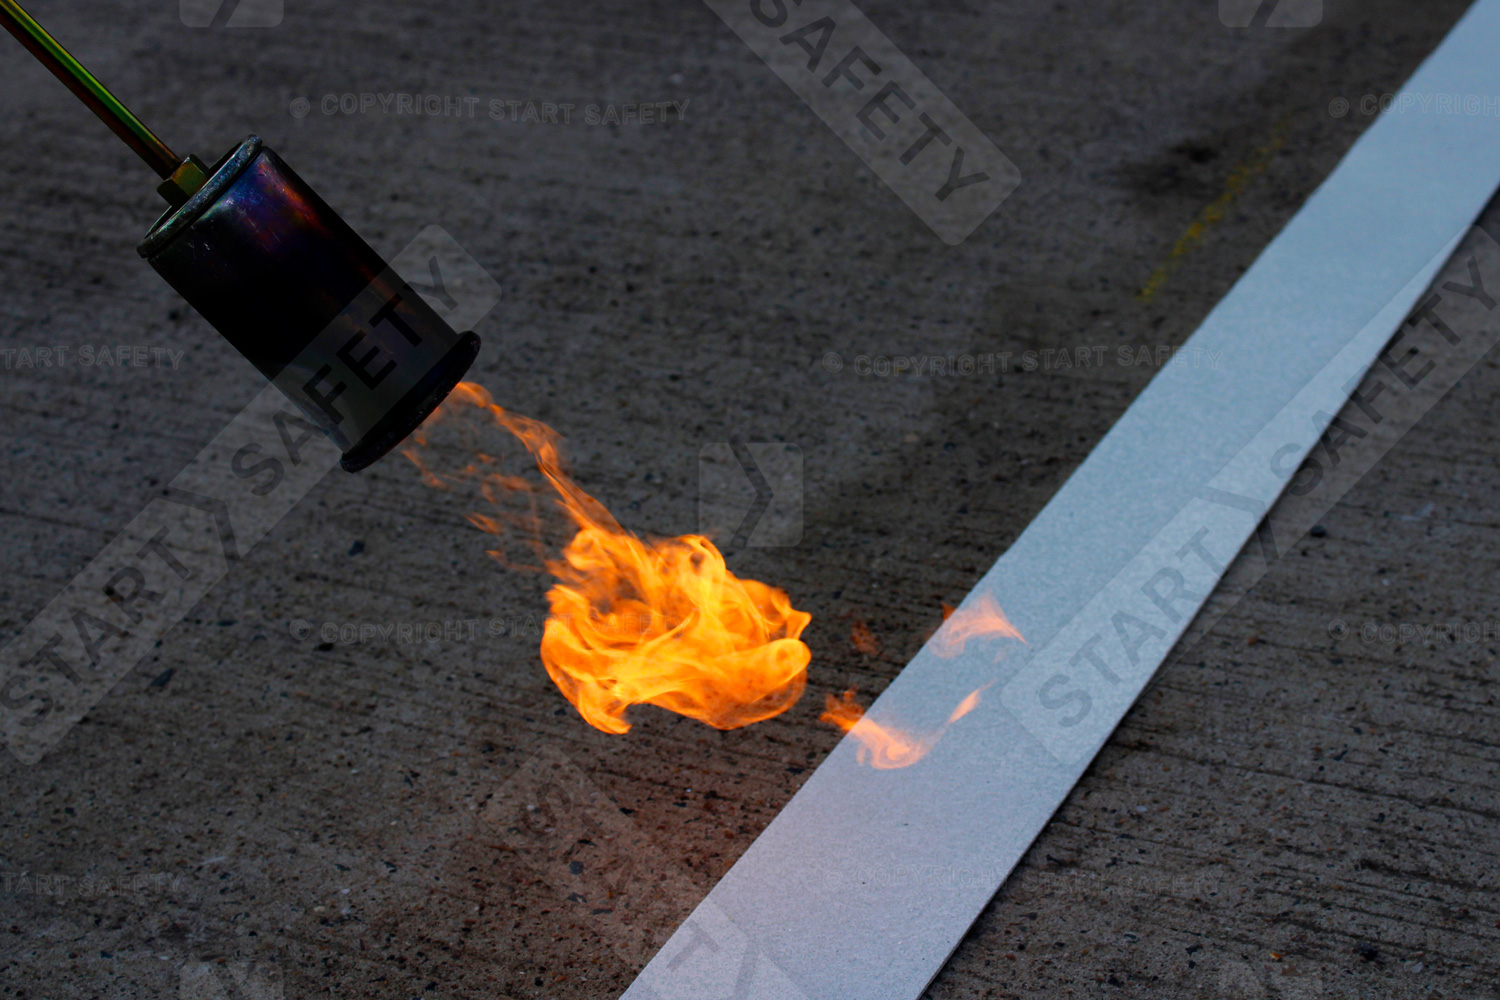 Thermoplastic marking being applied using gas burner